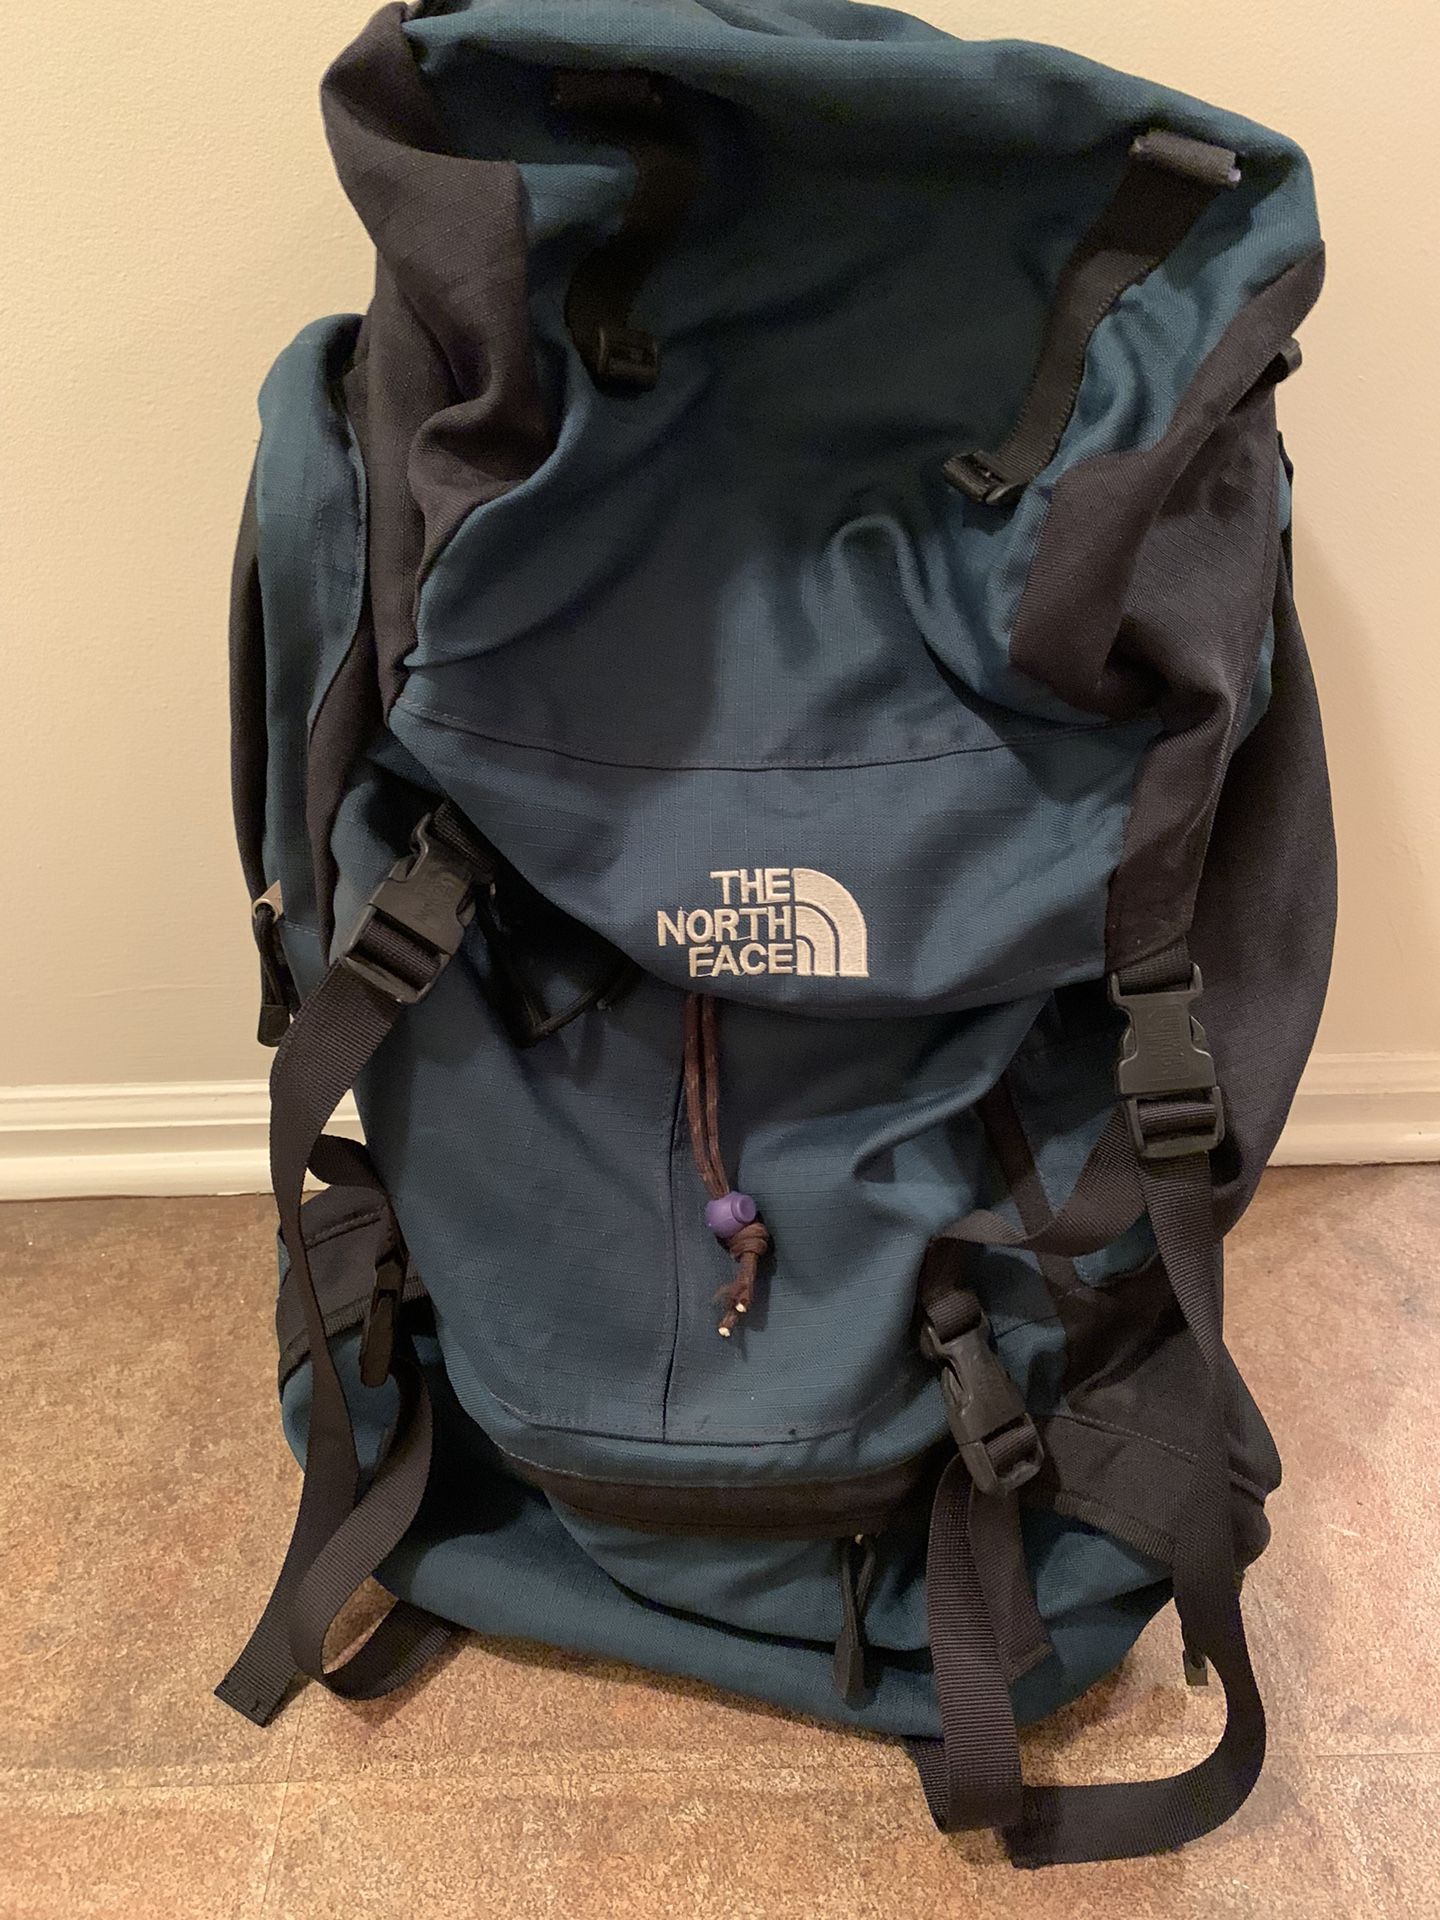 The North Face hiking backpack 